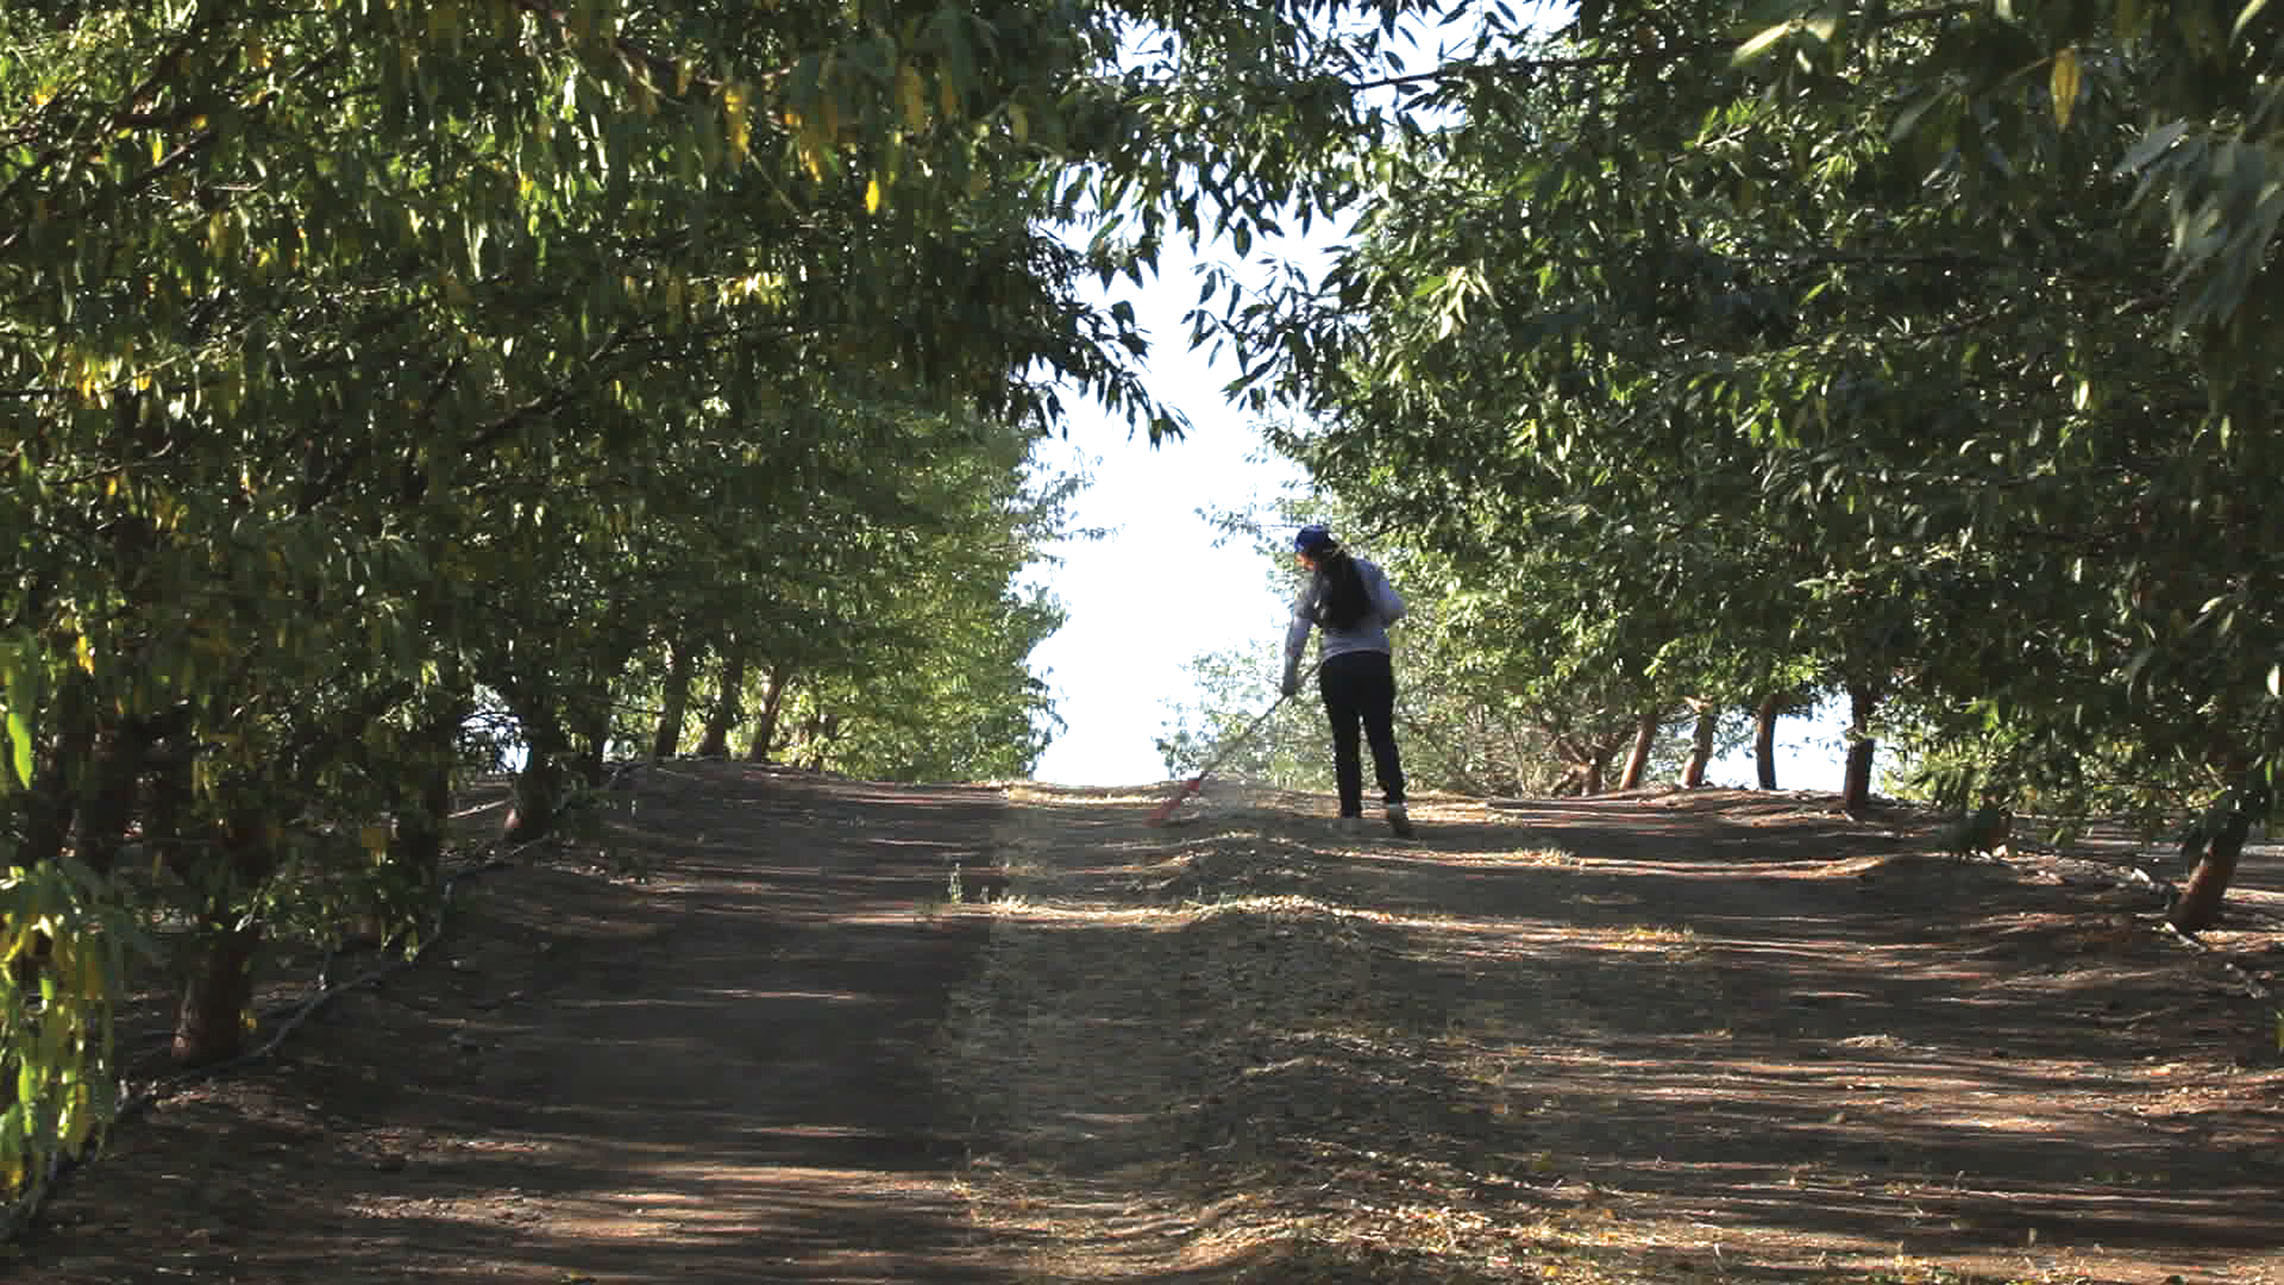 A solitary woman works in between rows of trees in an orchard. (Photo by Andrés Cediel.)